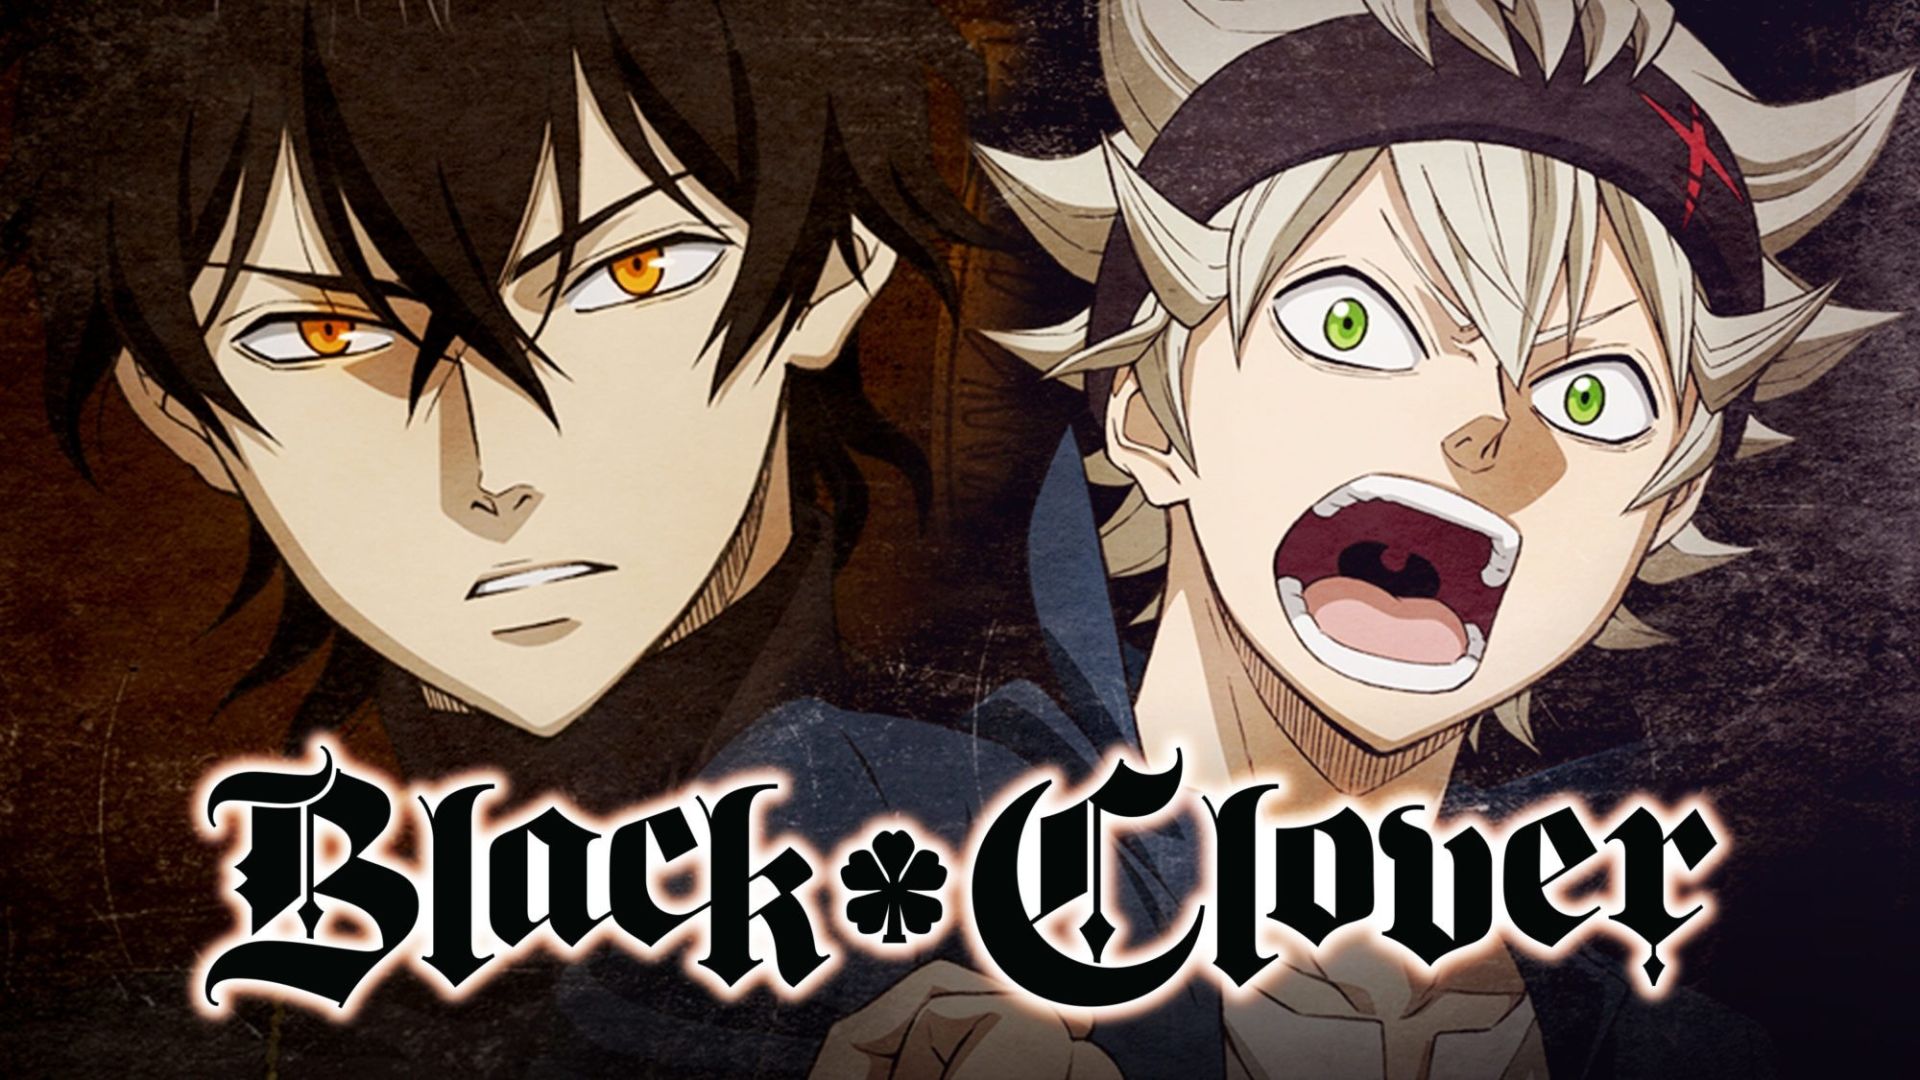 Black Clover Chapter 239 Title and Plot Spoilers